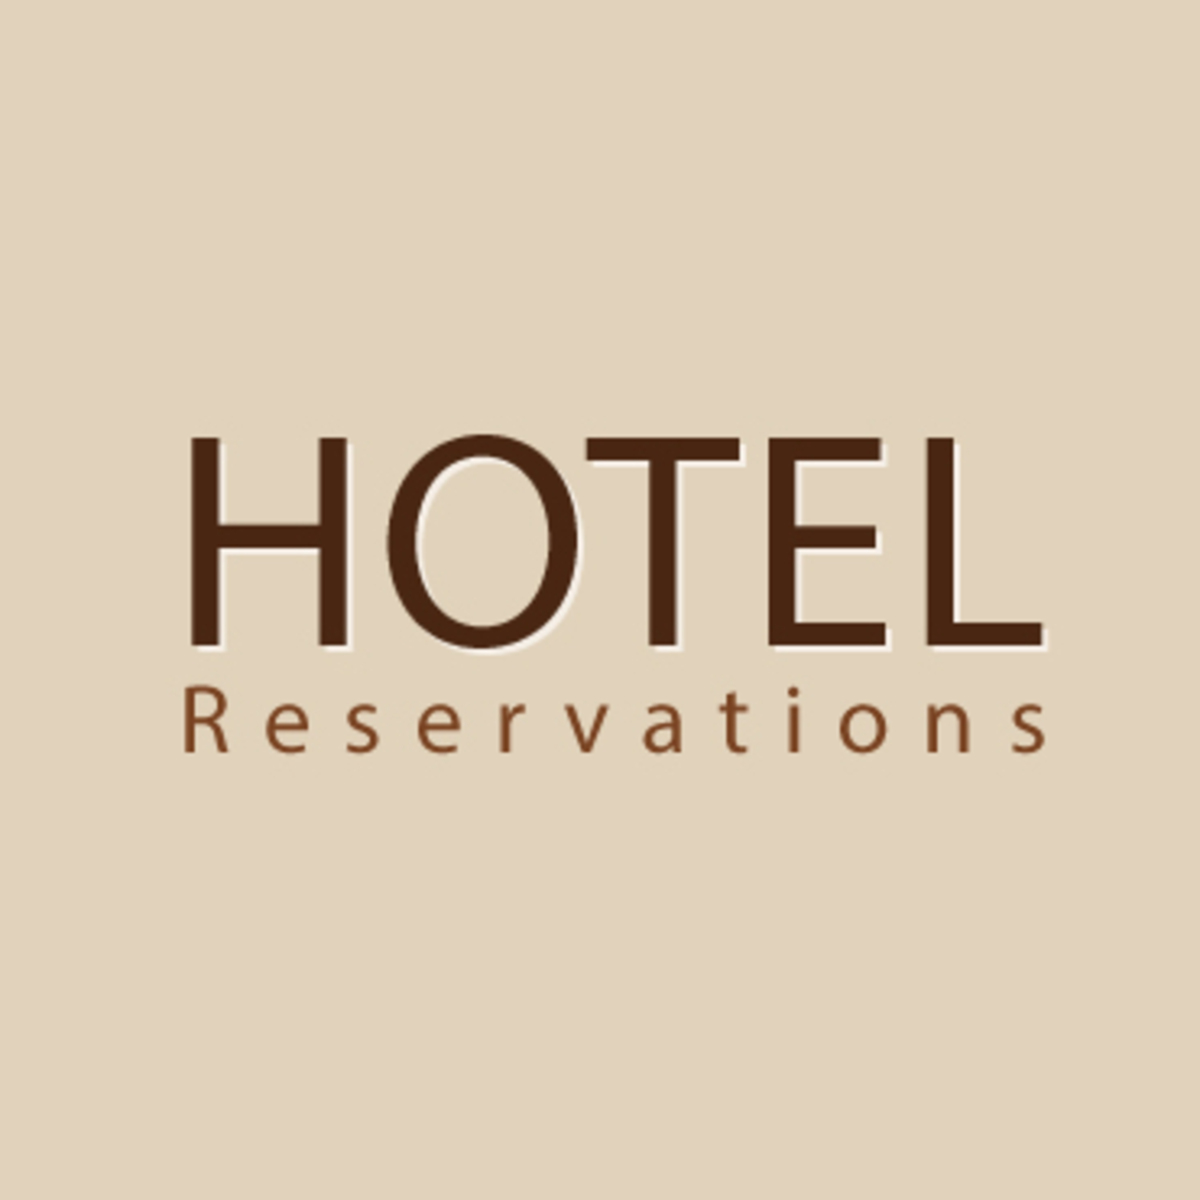 Hotels Booking Data - Cleaned Version | Kaggle